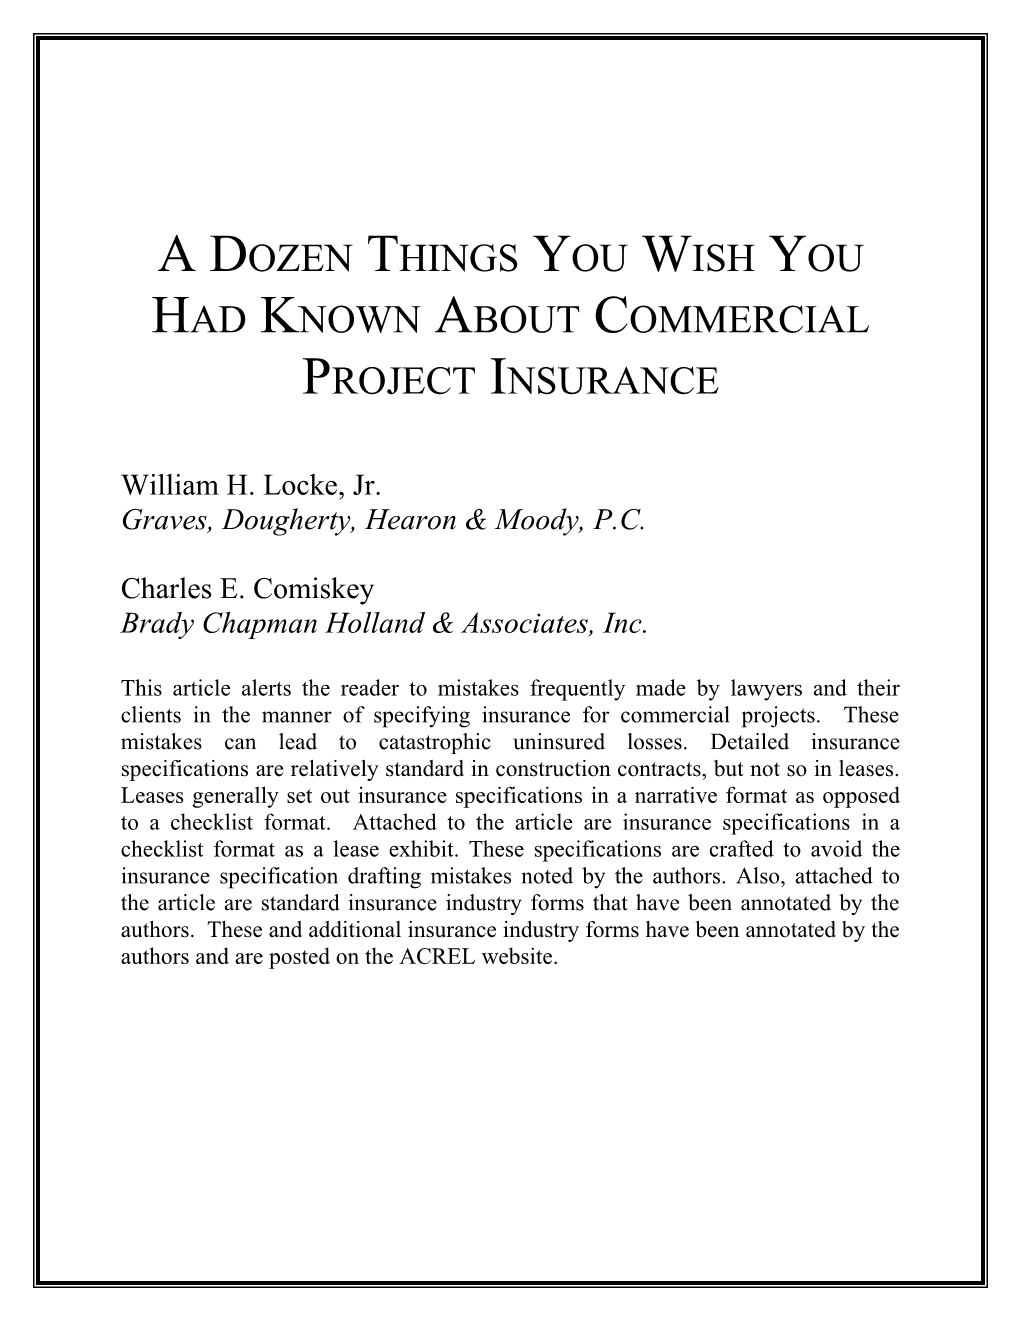 A Dozen Things You Wish You Had Known About Commercial